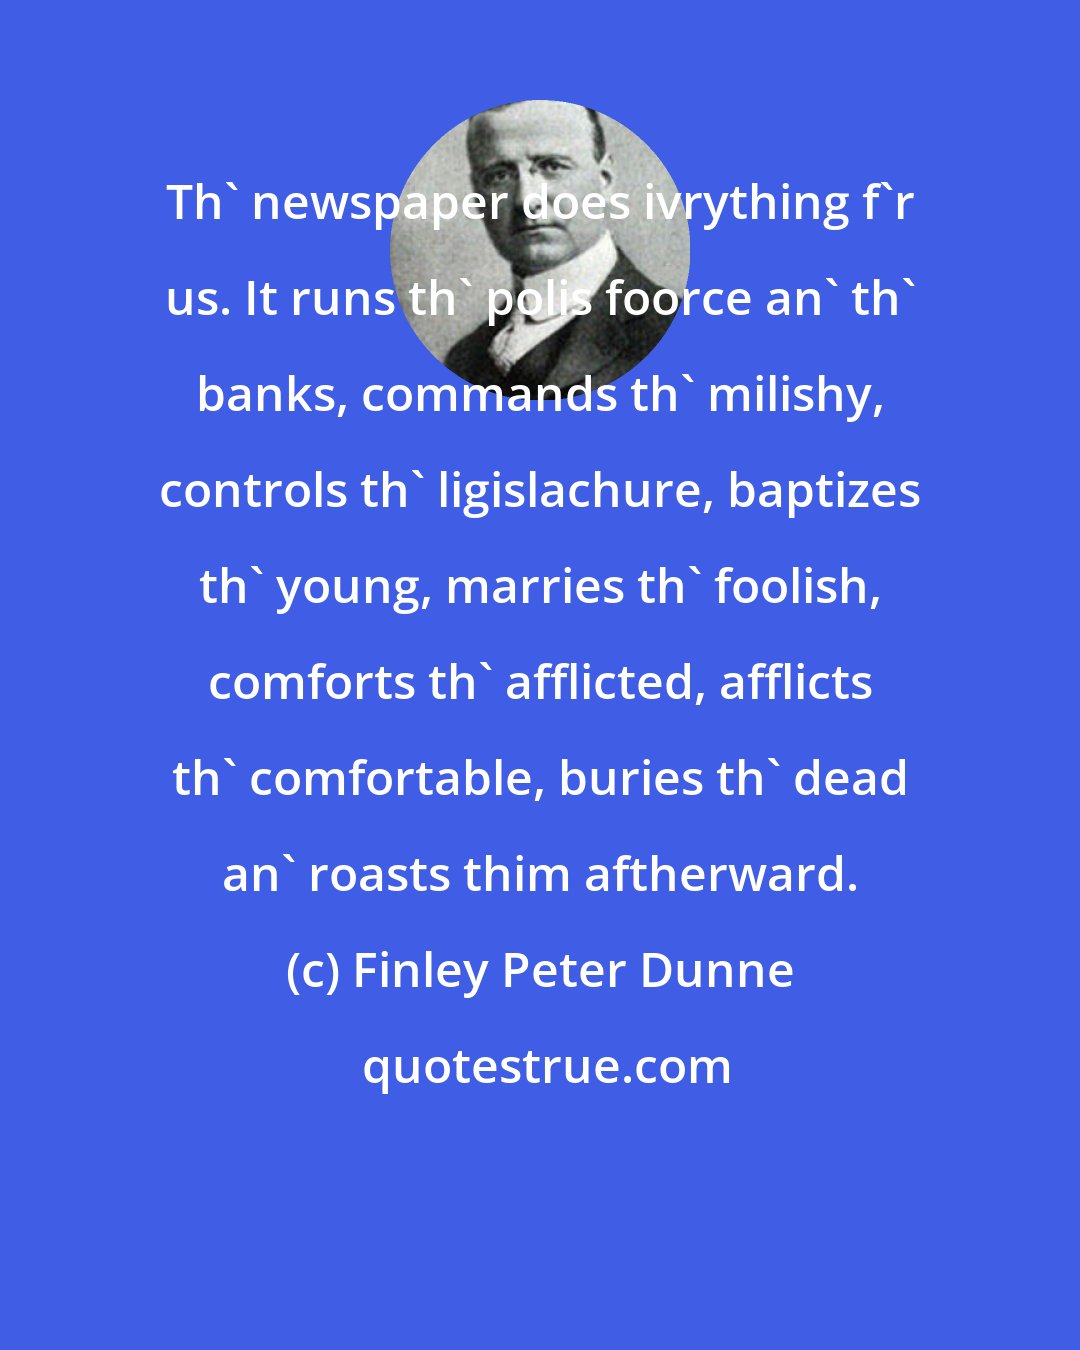 Finley Peter Dunne: Th' newspaper does ivrything f'r us. It runs th' polis foorce an' th' banks, commands th' milishy, controls th' ligislachure, baptizes th' young, marries th' foolish, comforts th' afflicted, afflicts th' comfortable, buries th' dead an' roasts thim aftherward.